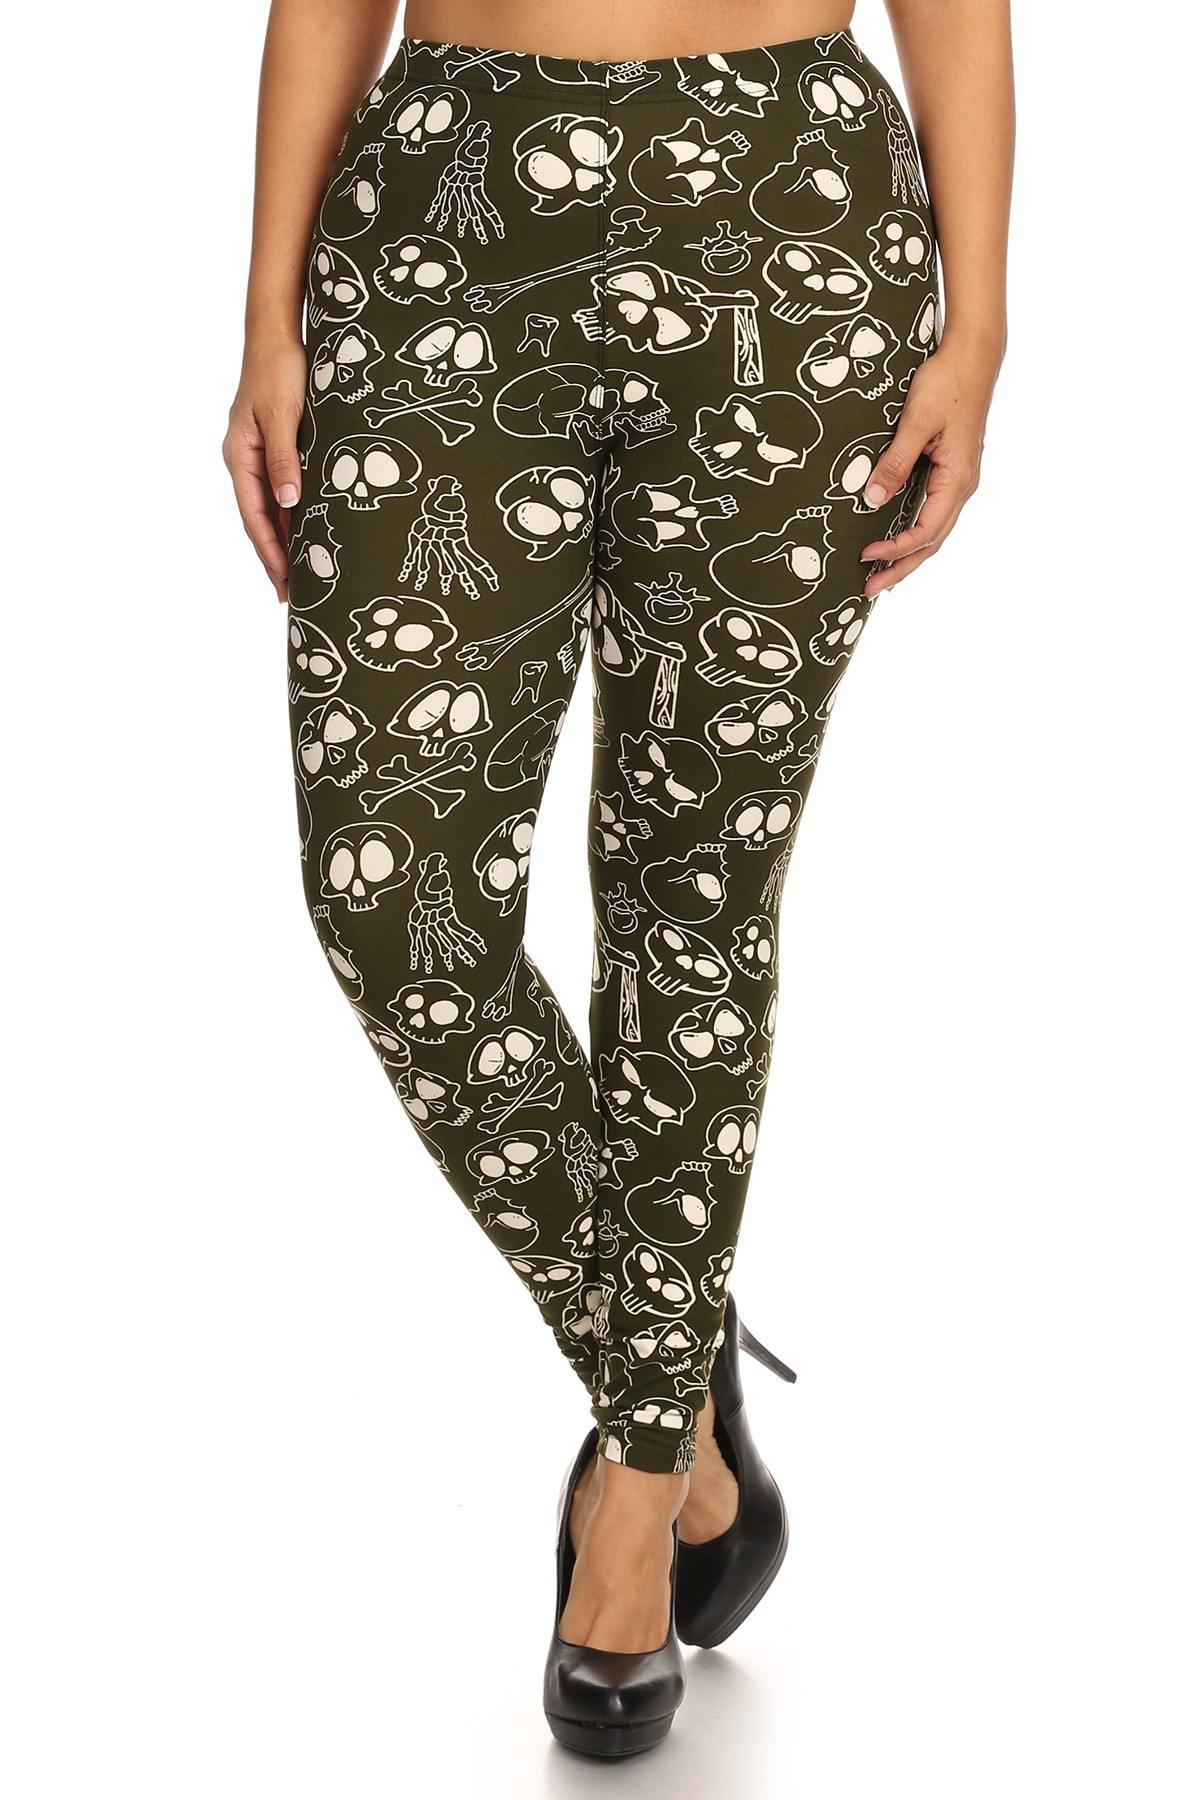 Skulls And Bones Graphic Printed Knit Legging With Elastic Waist Detail. High Waist Fit. - Fashion Quality Boutik